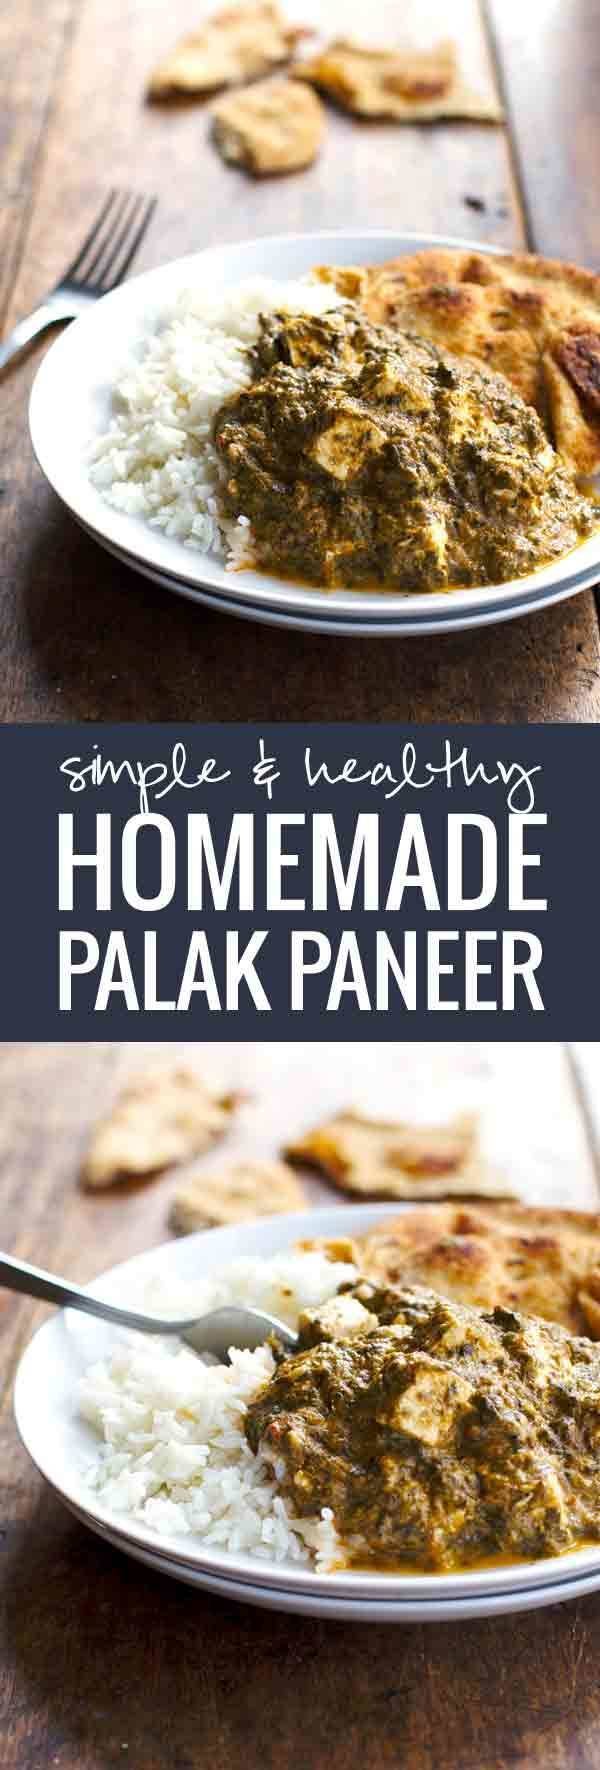 Simple & Healthy Homemade Palak Paneer - A delicious take on a favorite Indian dish.